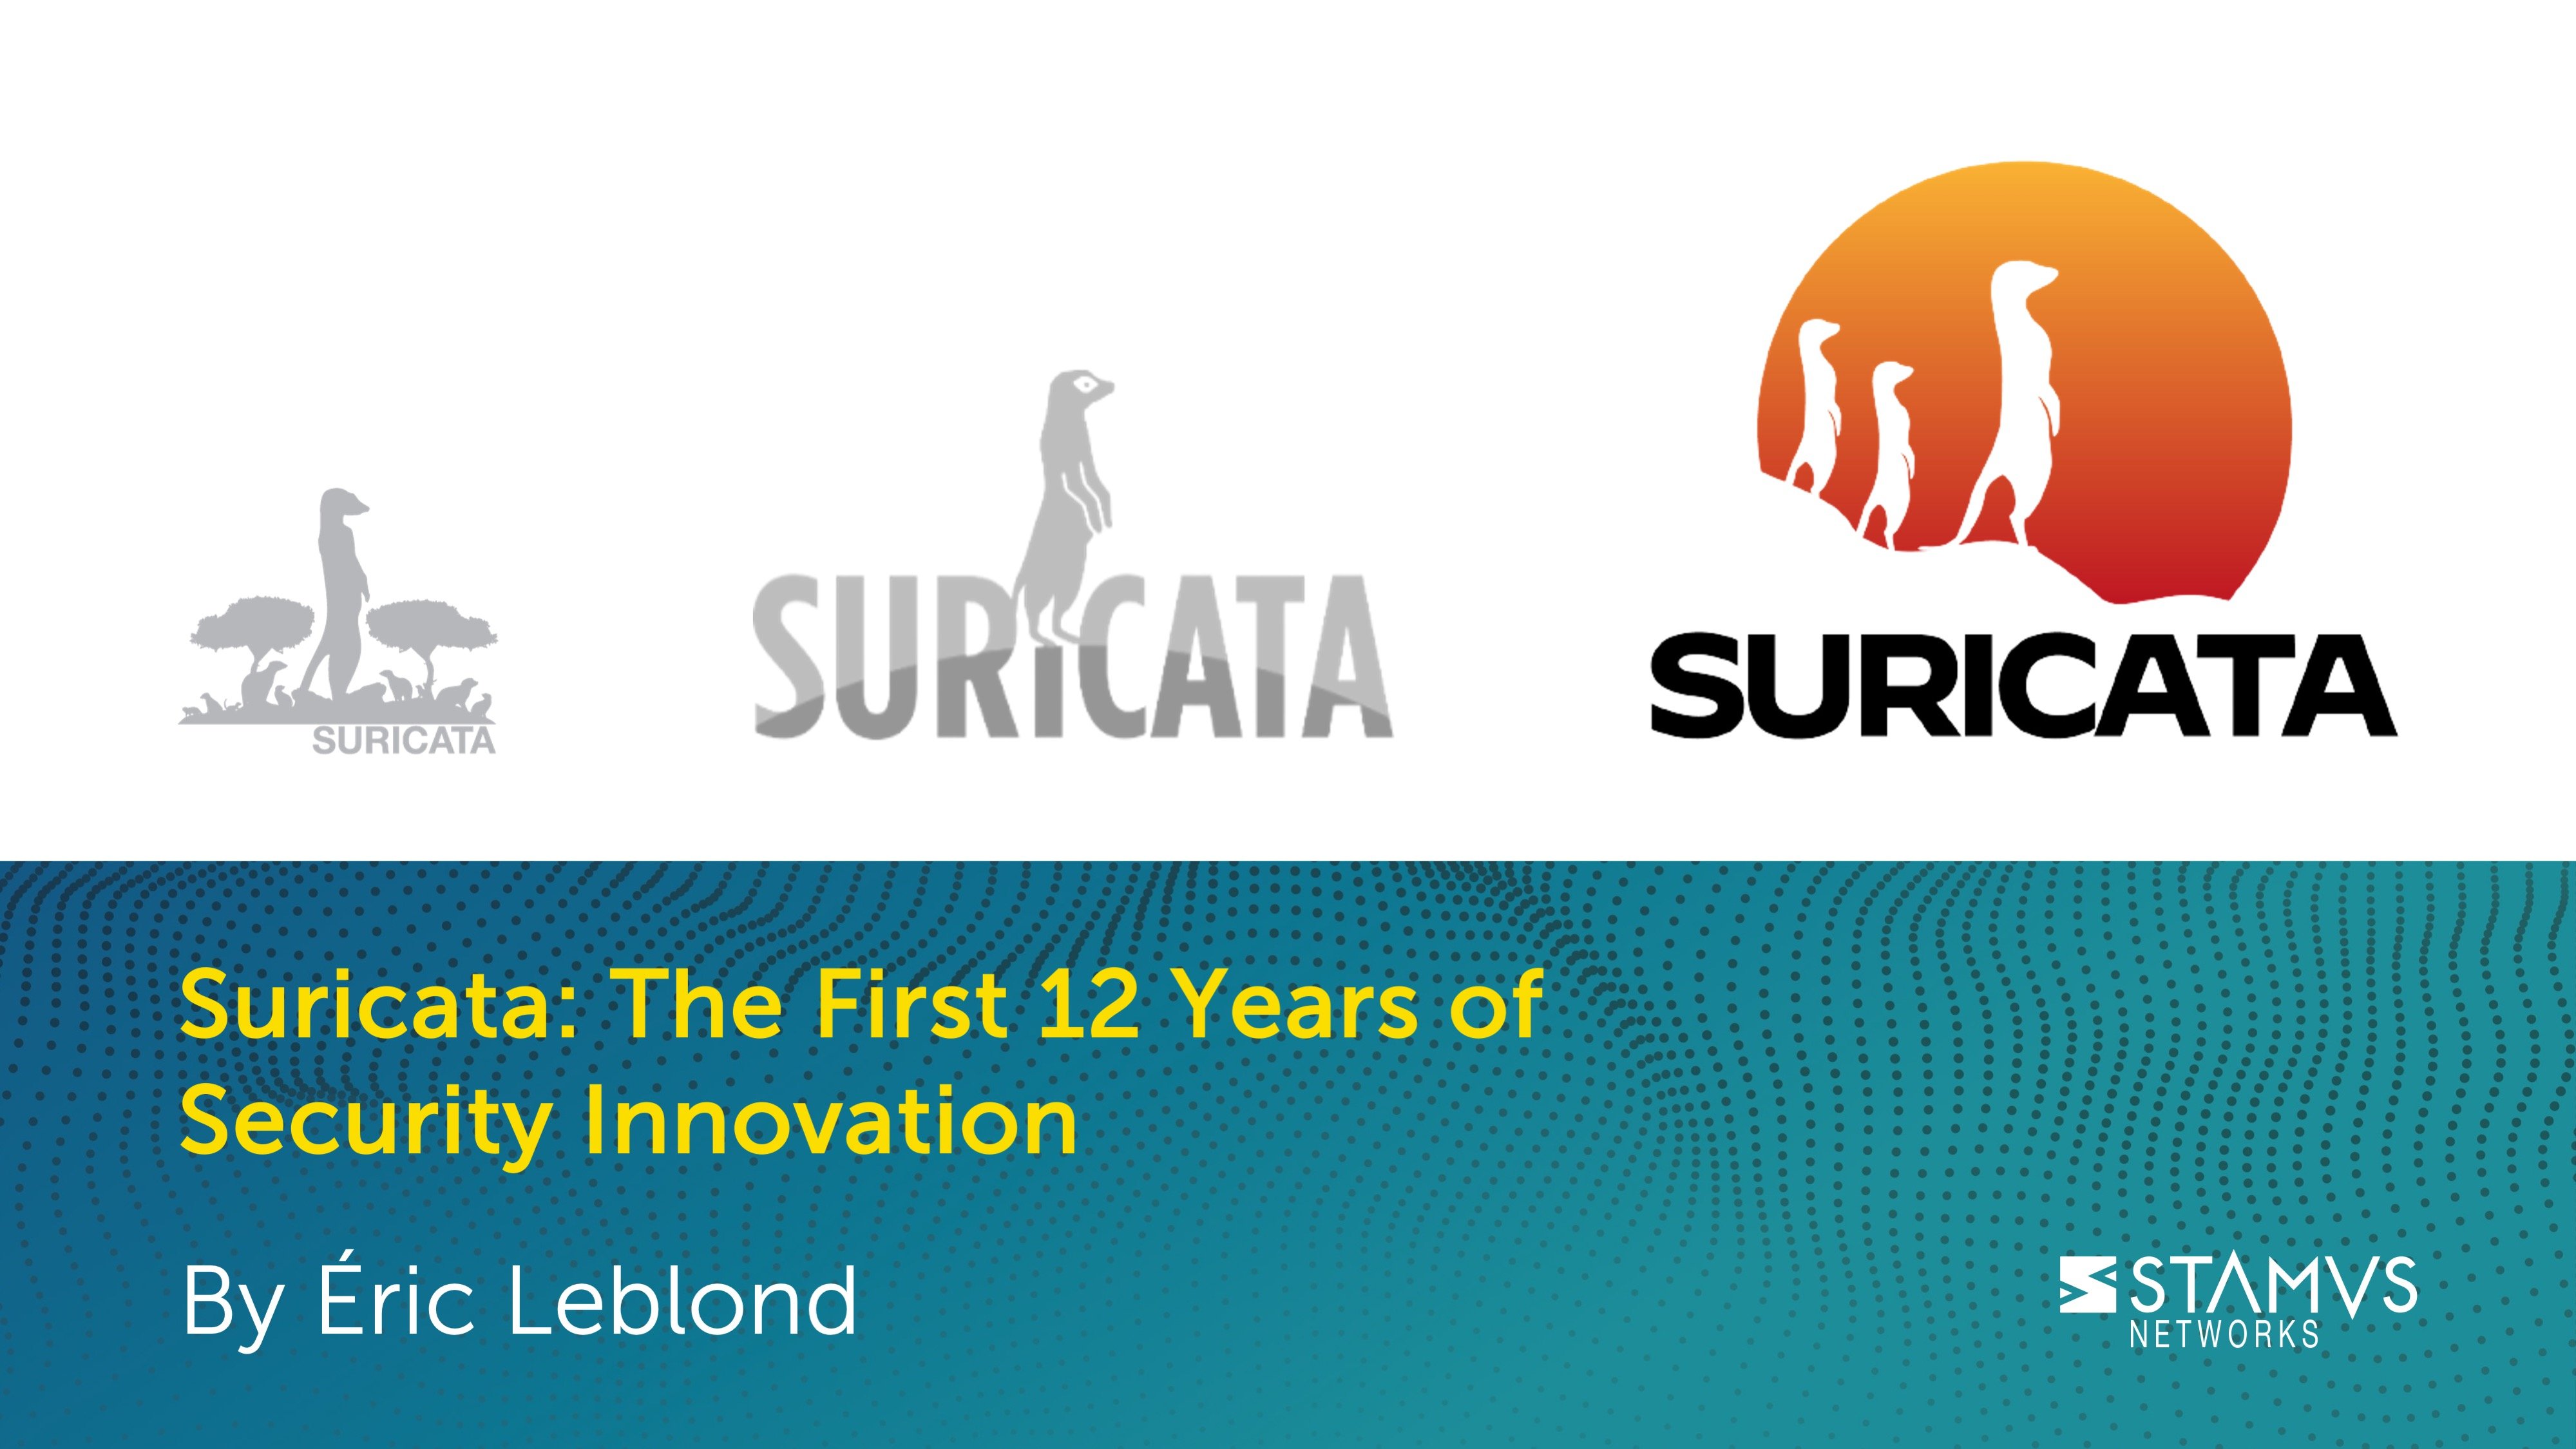 Suricata: The First 12 Years of Innovation